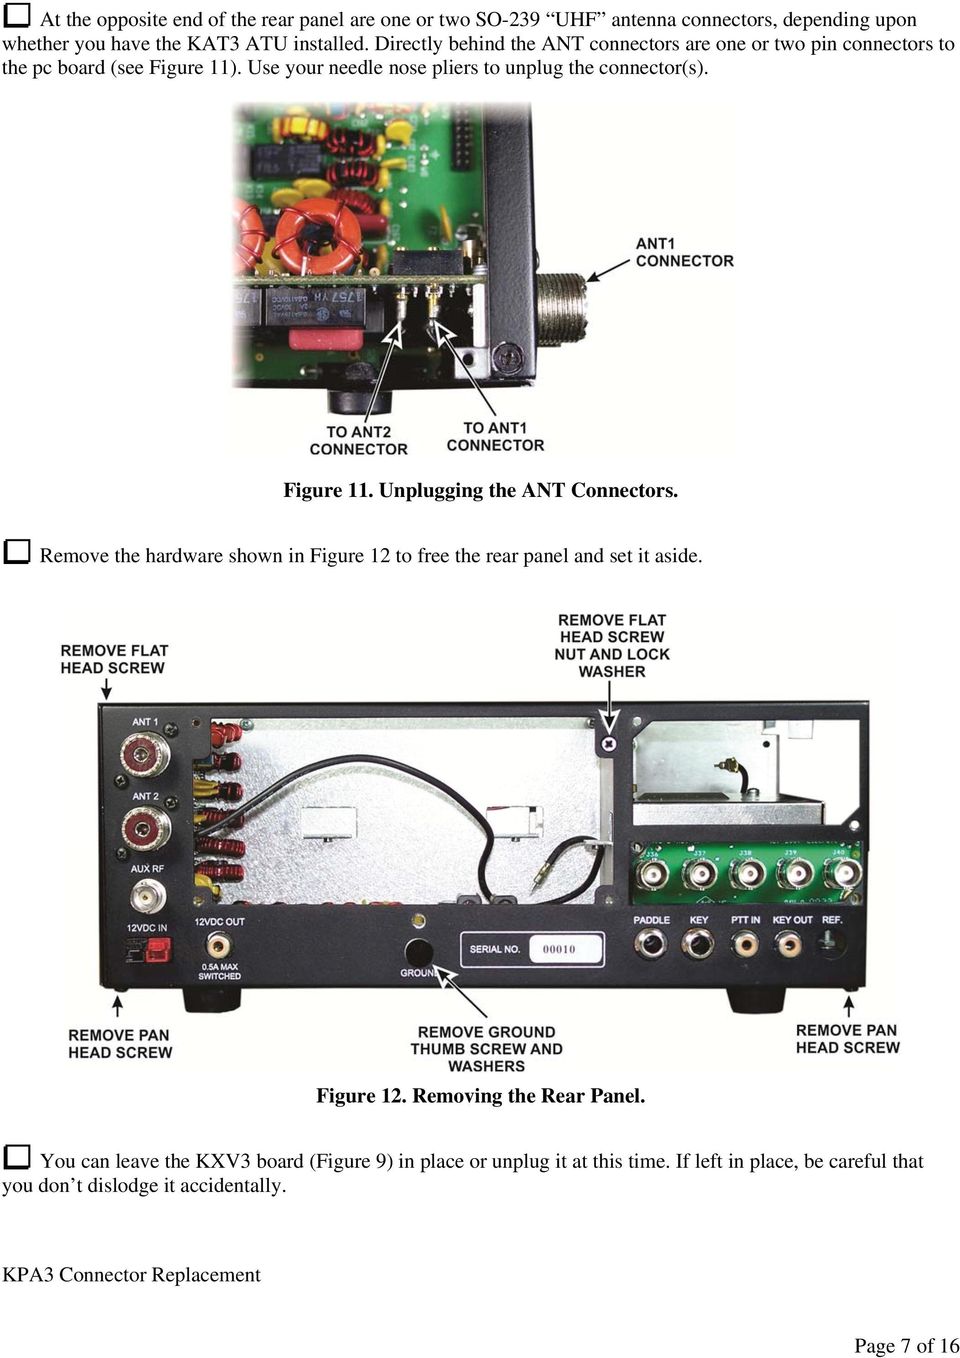 Figure 11. Unplugging the ANT Connectors. Remove the hardware shown in Figure 12 to free the rear panel and set it aside. Figure 12. Removing the Rear Panel.